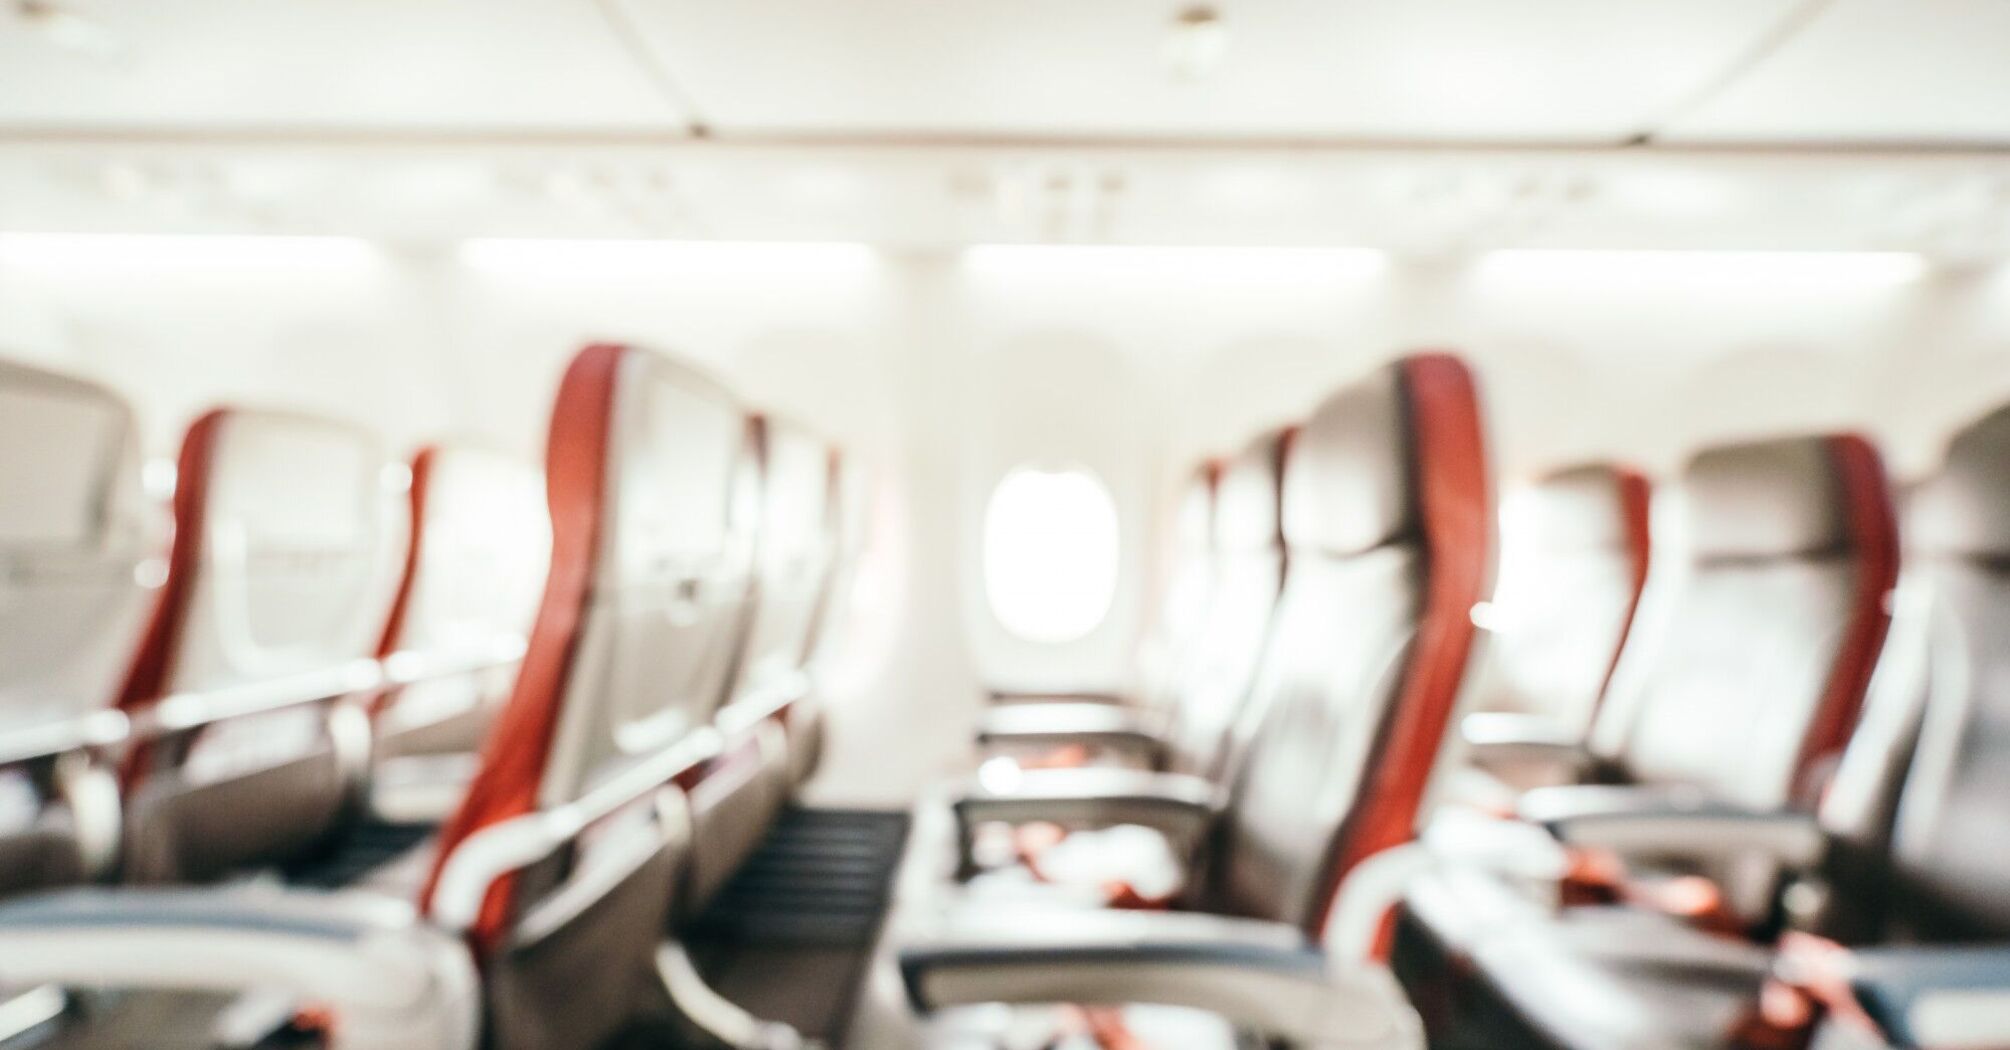 More space for comfort: 6 ways to make legroom on an airplane